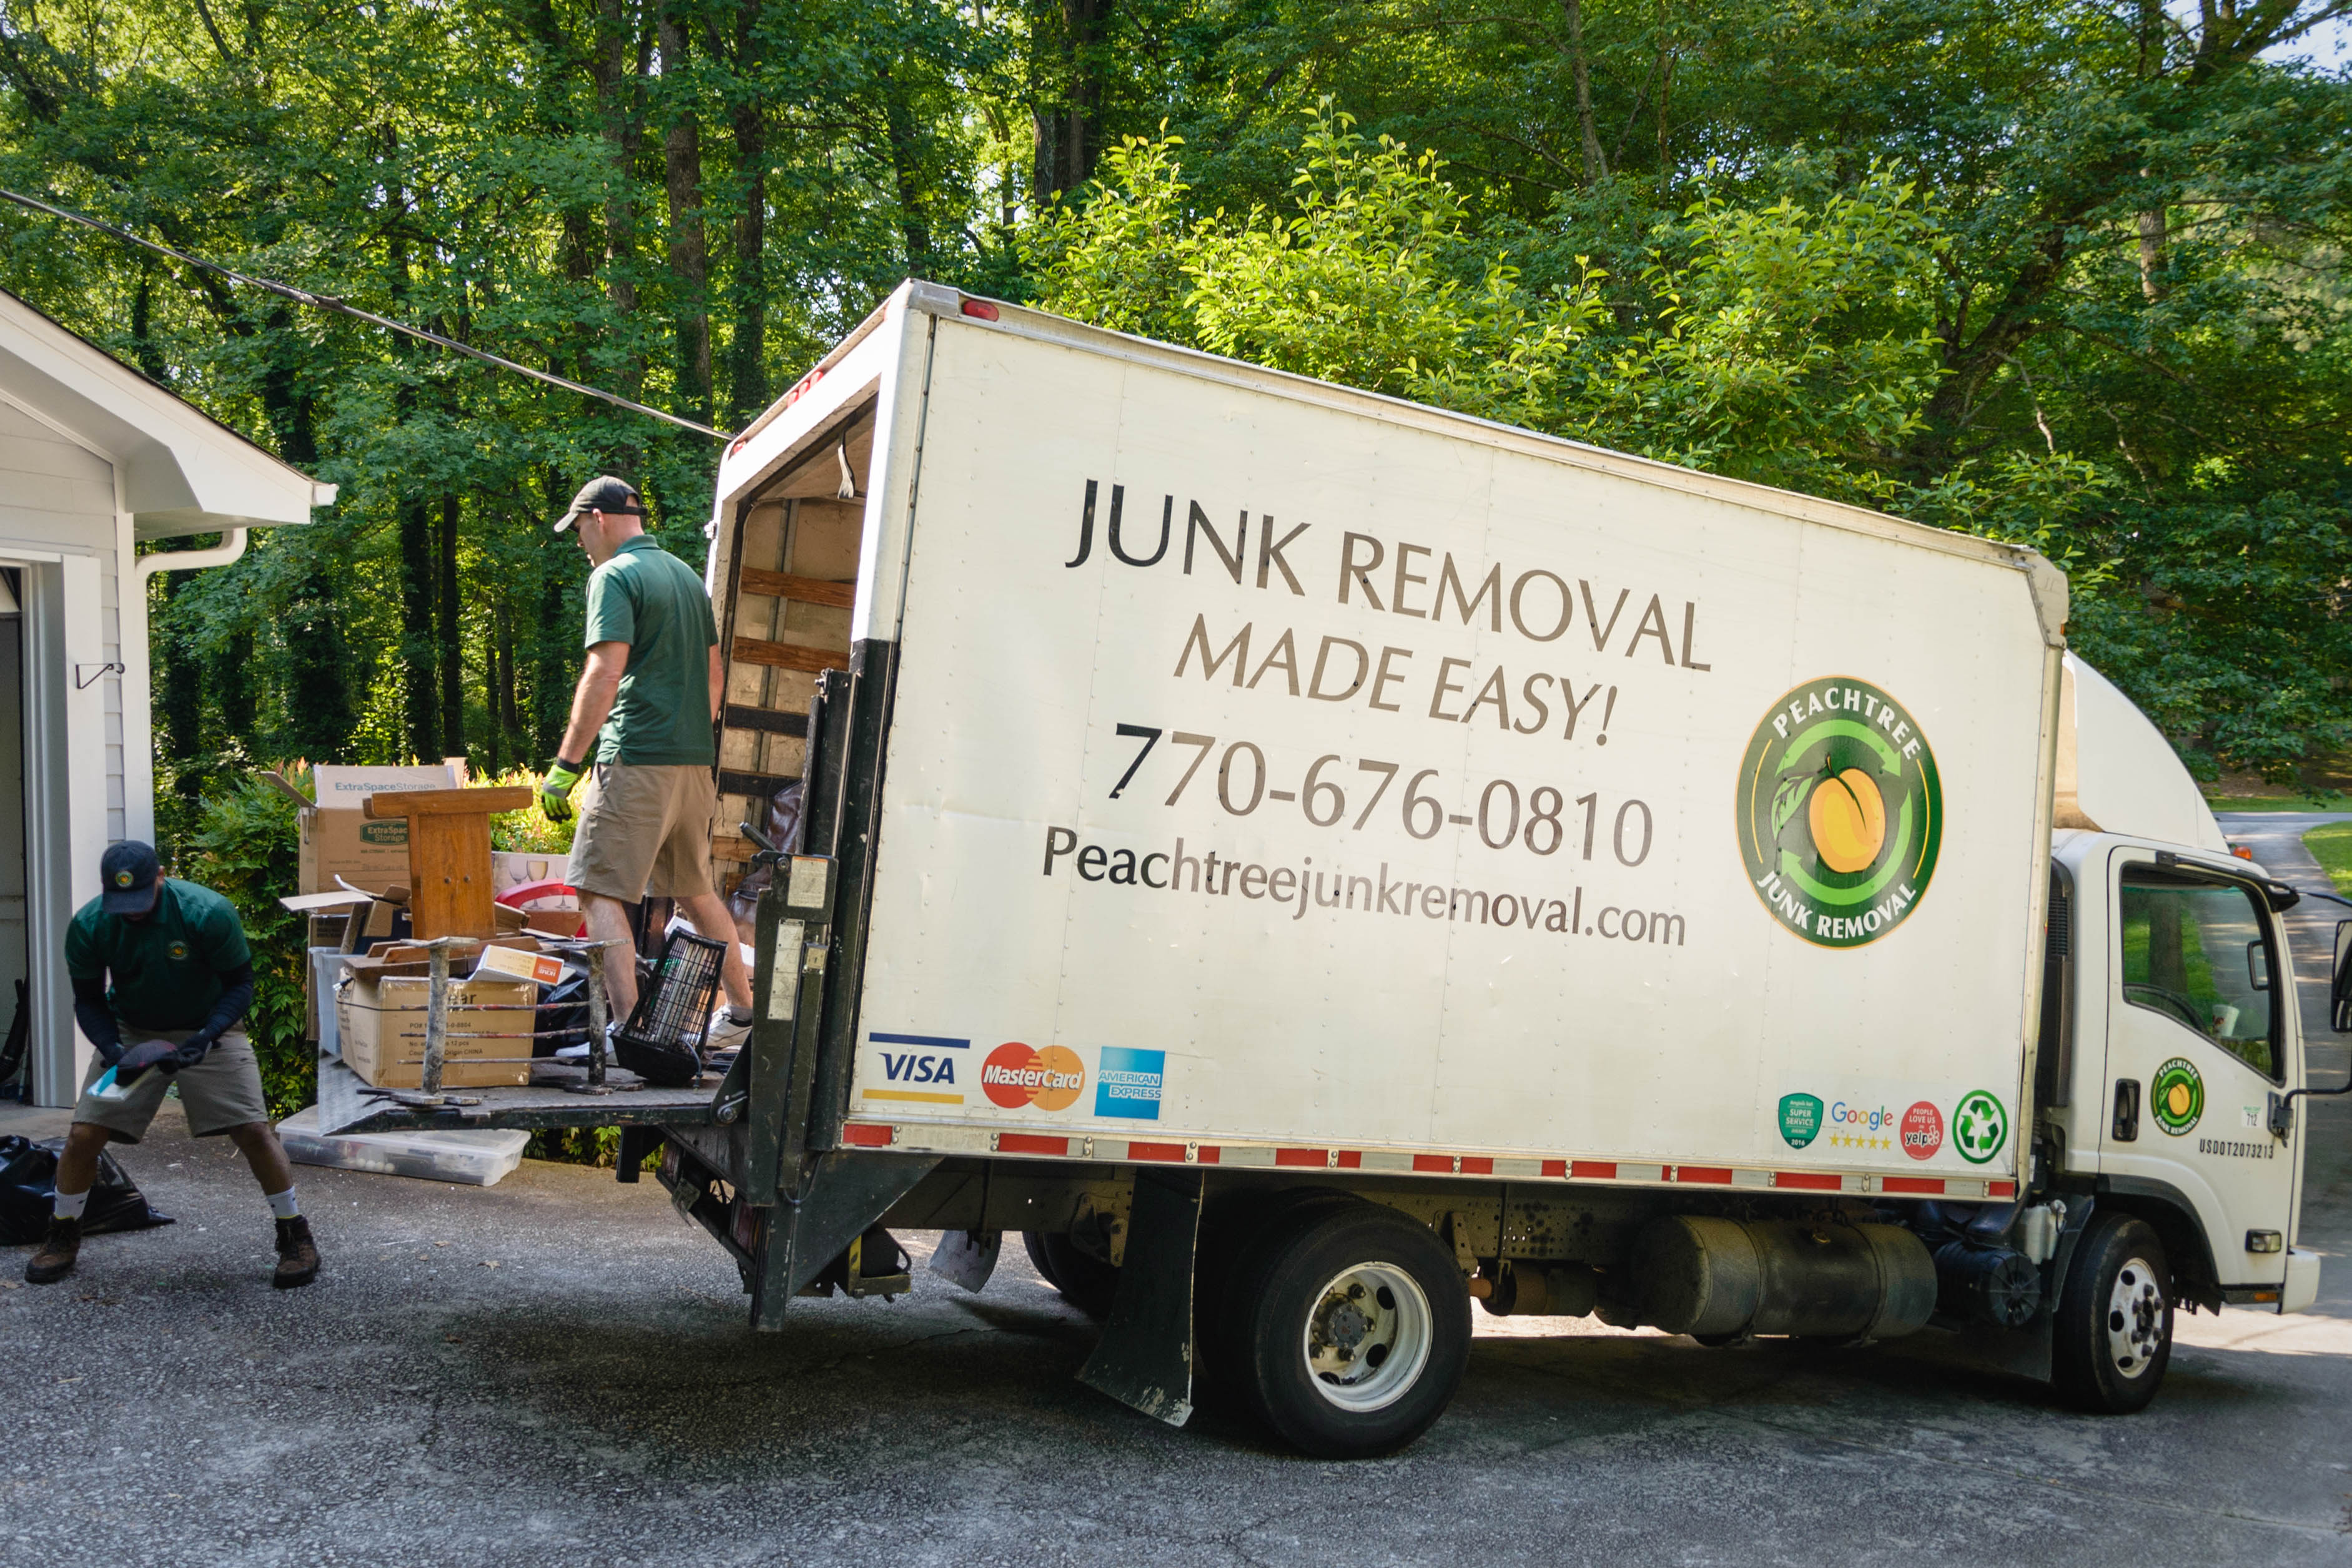 Junk Removal Truck